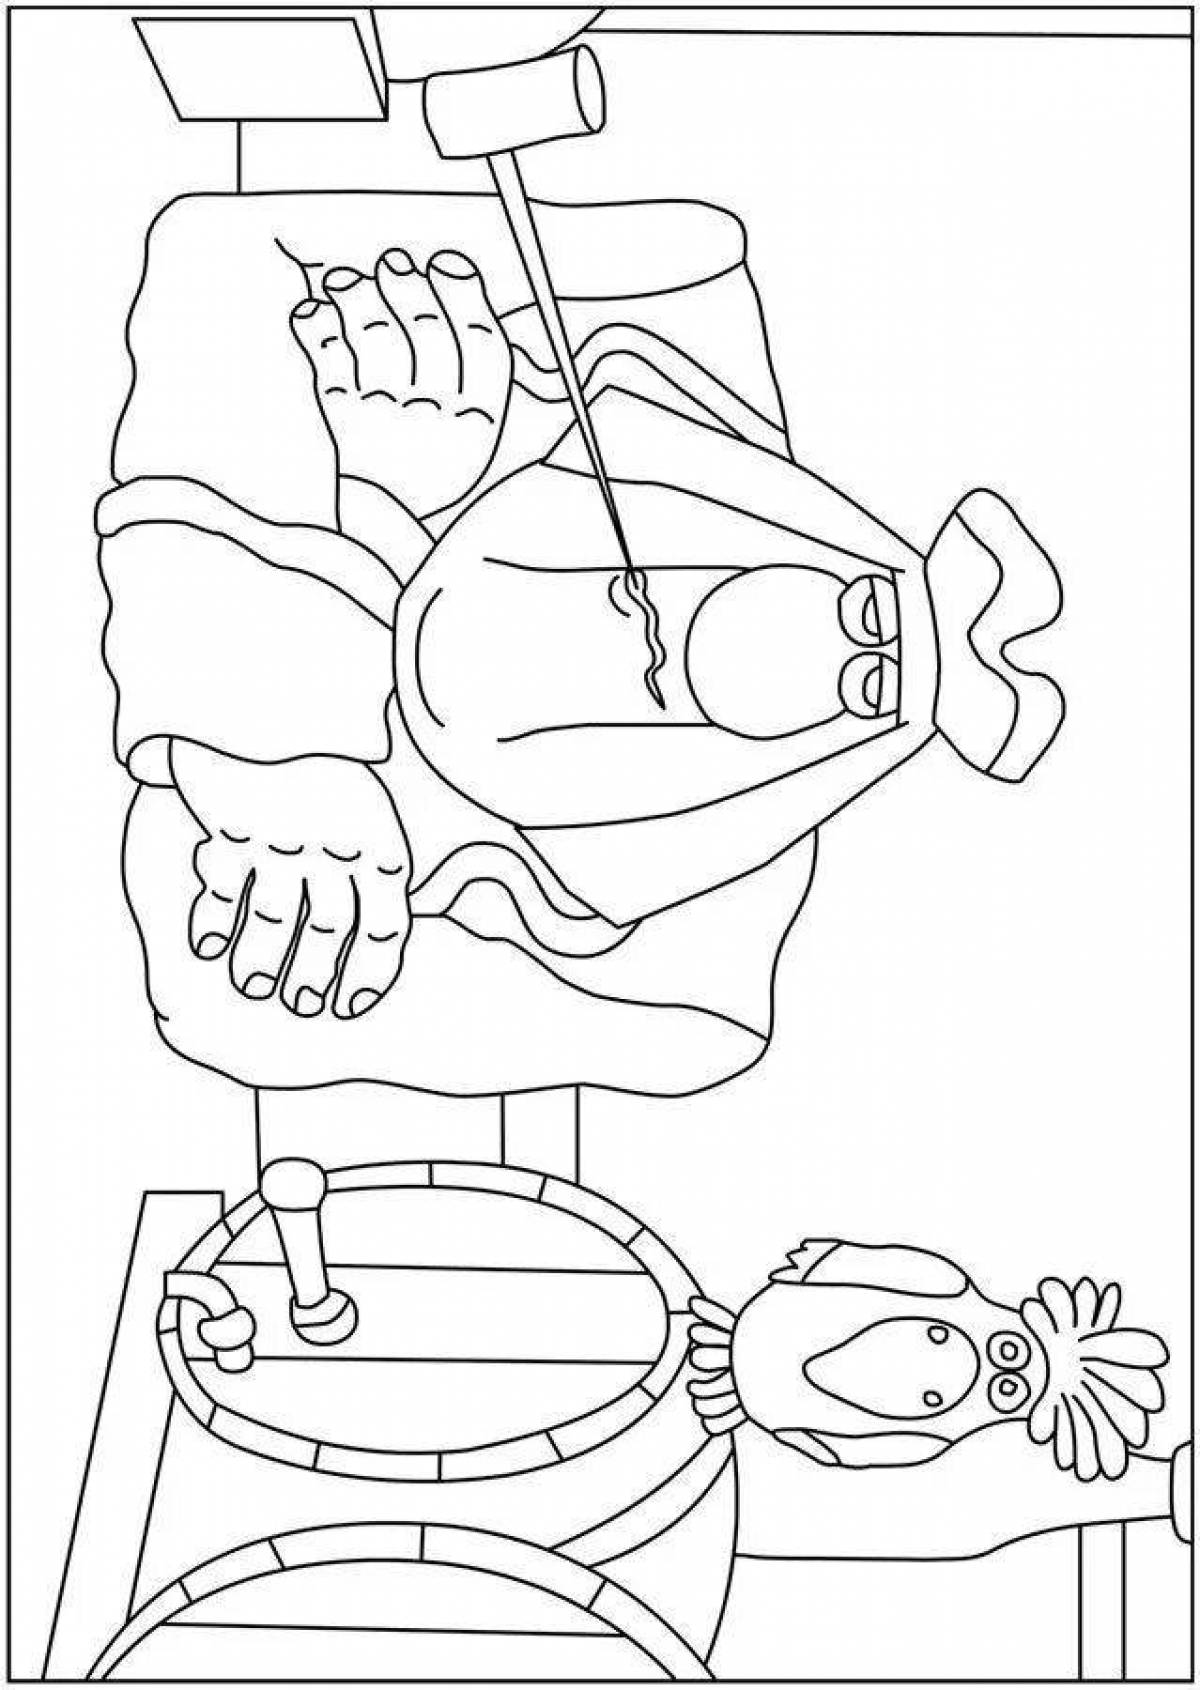 Coloring page playful captain vrungel